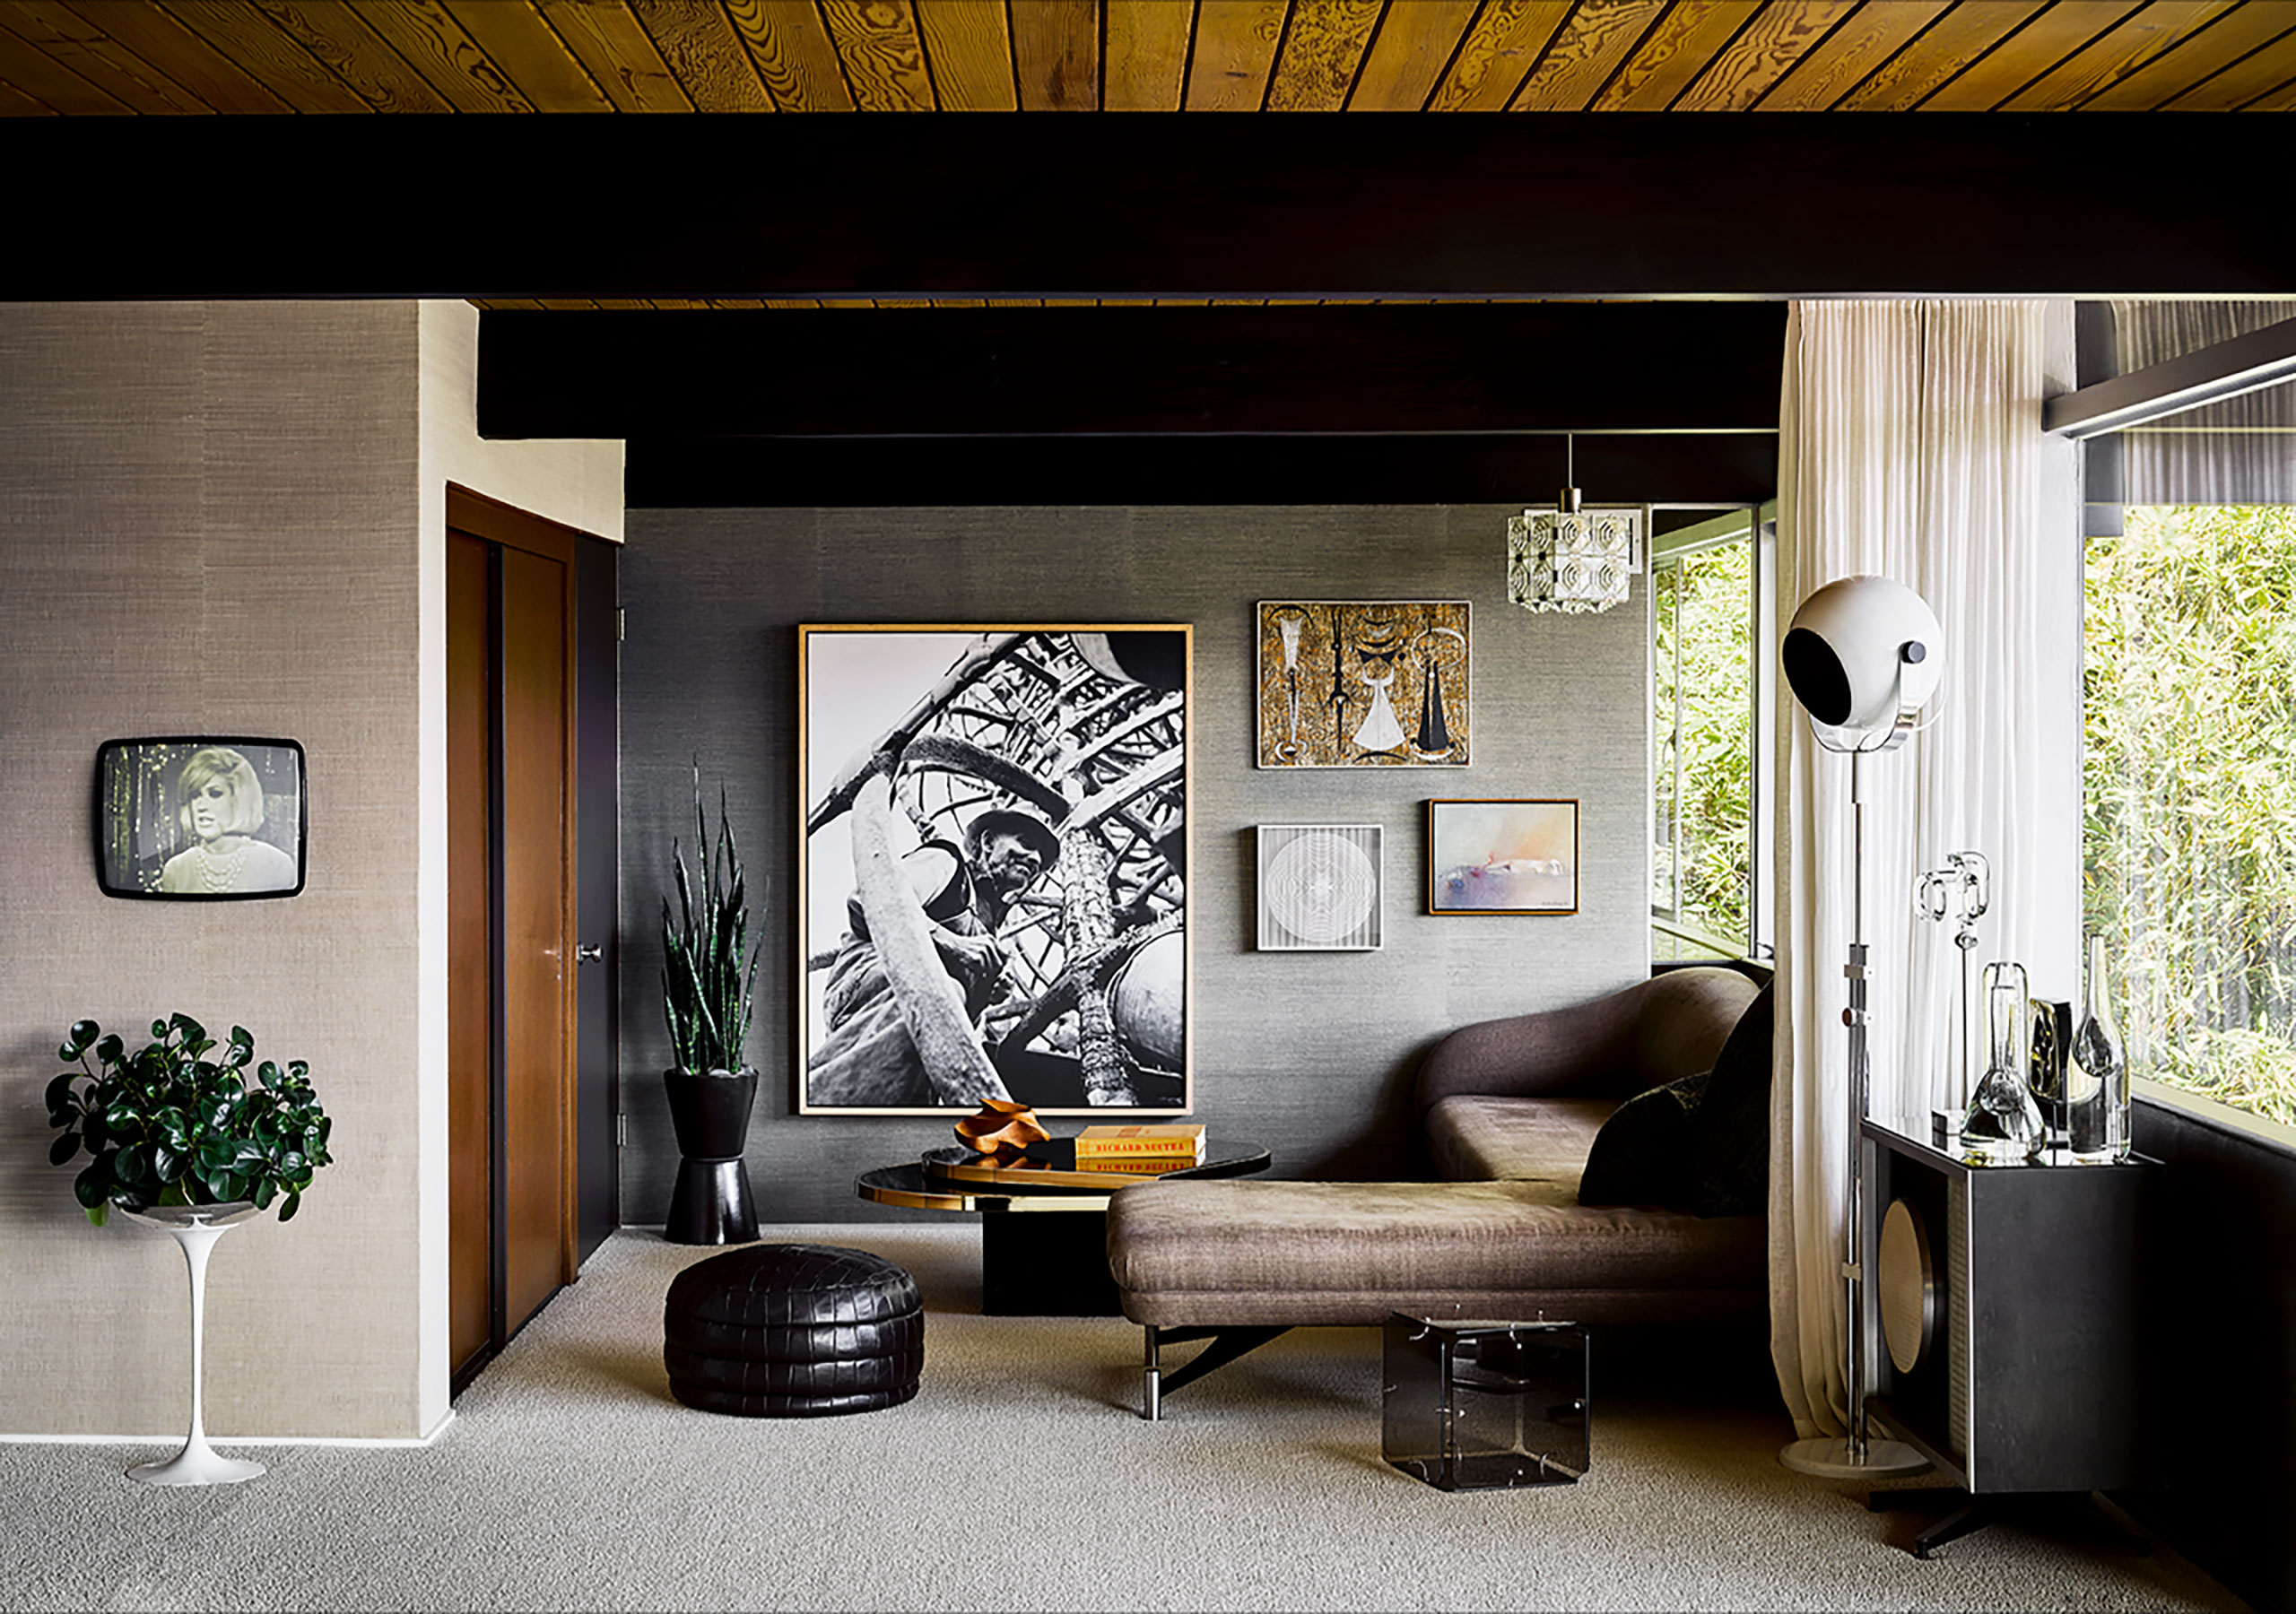 Photography by Douglas Friedman.
Featured: Swan sofa by Vladimir Kagan; original built-in TV, Eames Speaker used as side table; glass cube table by Gerard McCabe; leather patchwork ottoman by DeSede.